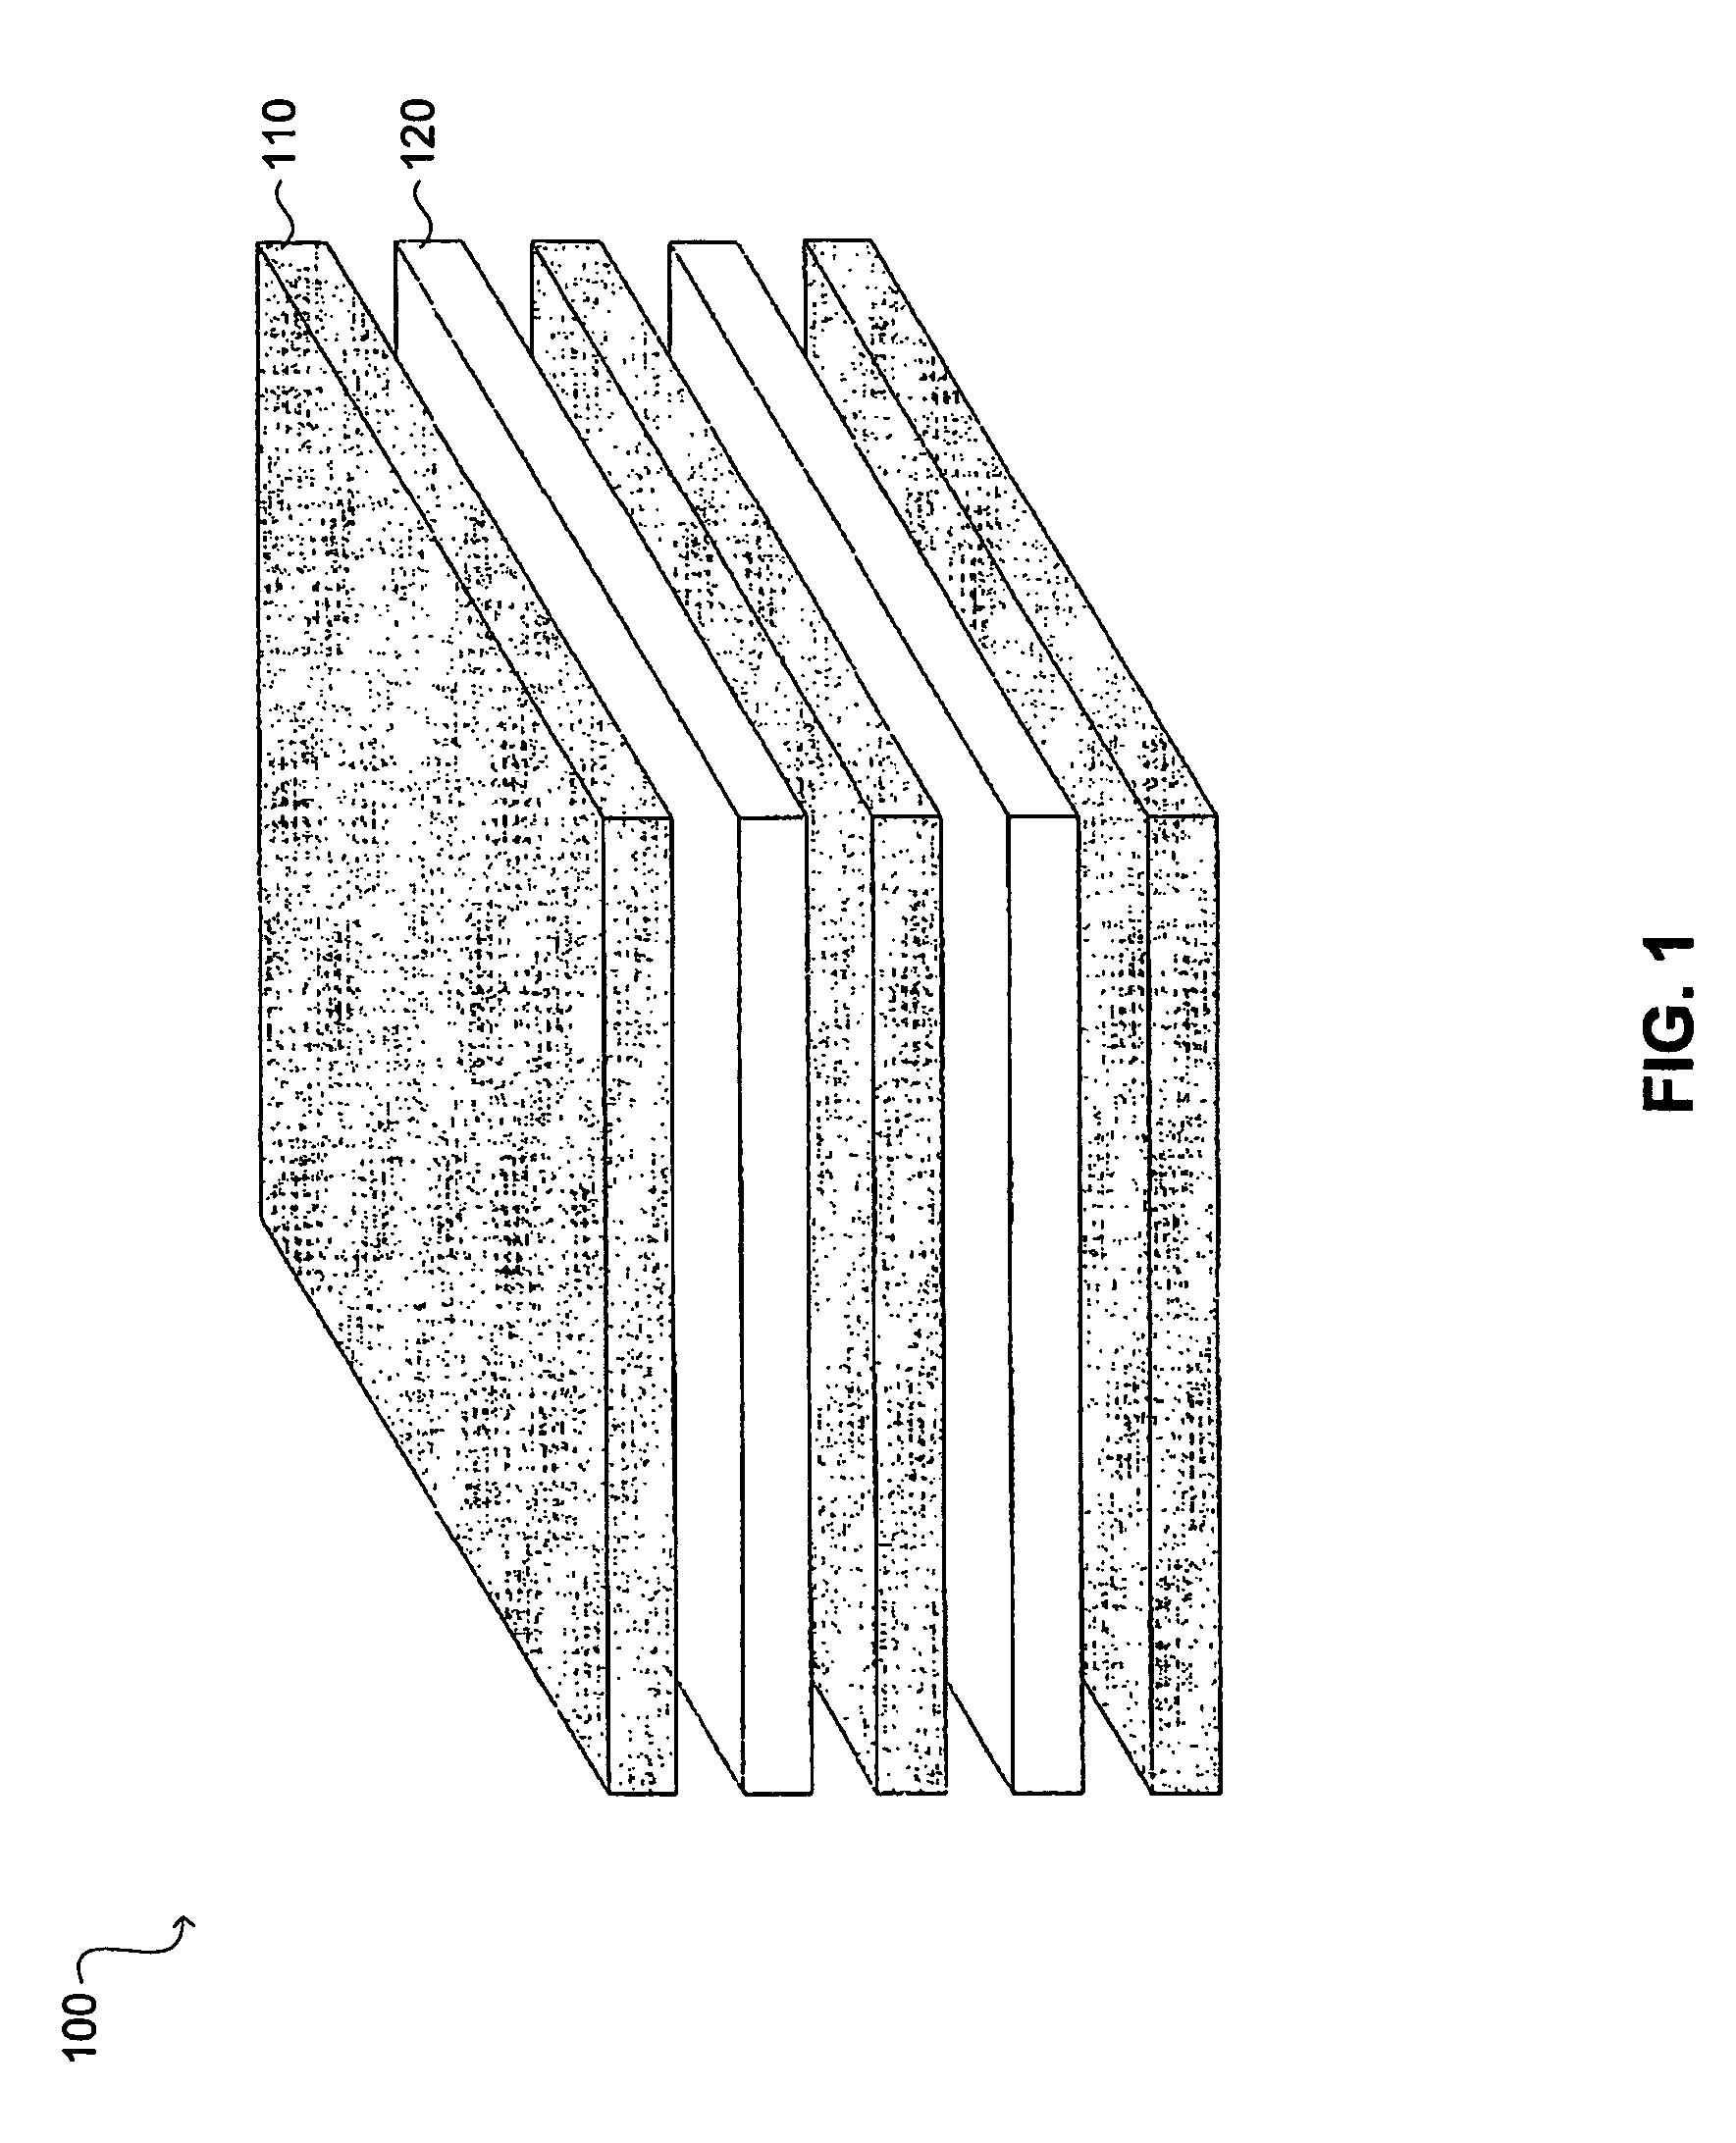 High density metal-to-metal maze capacitor with optimized capacitance matching